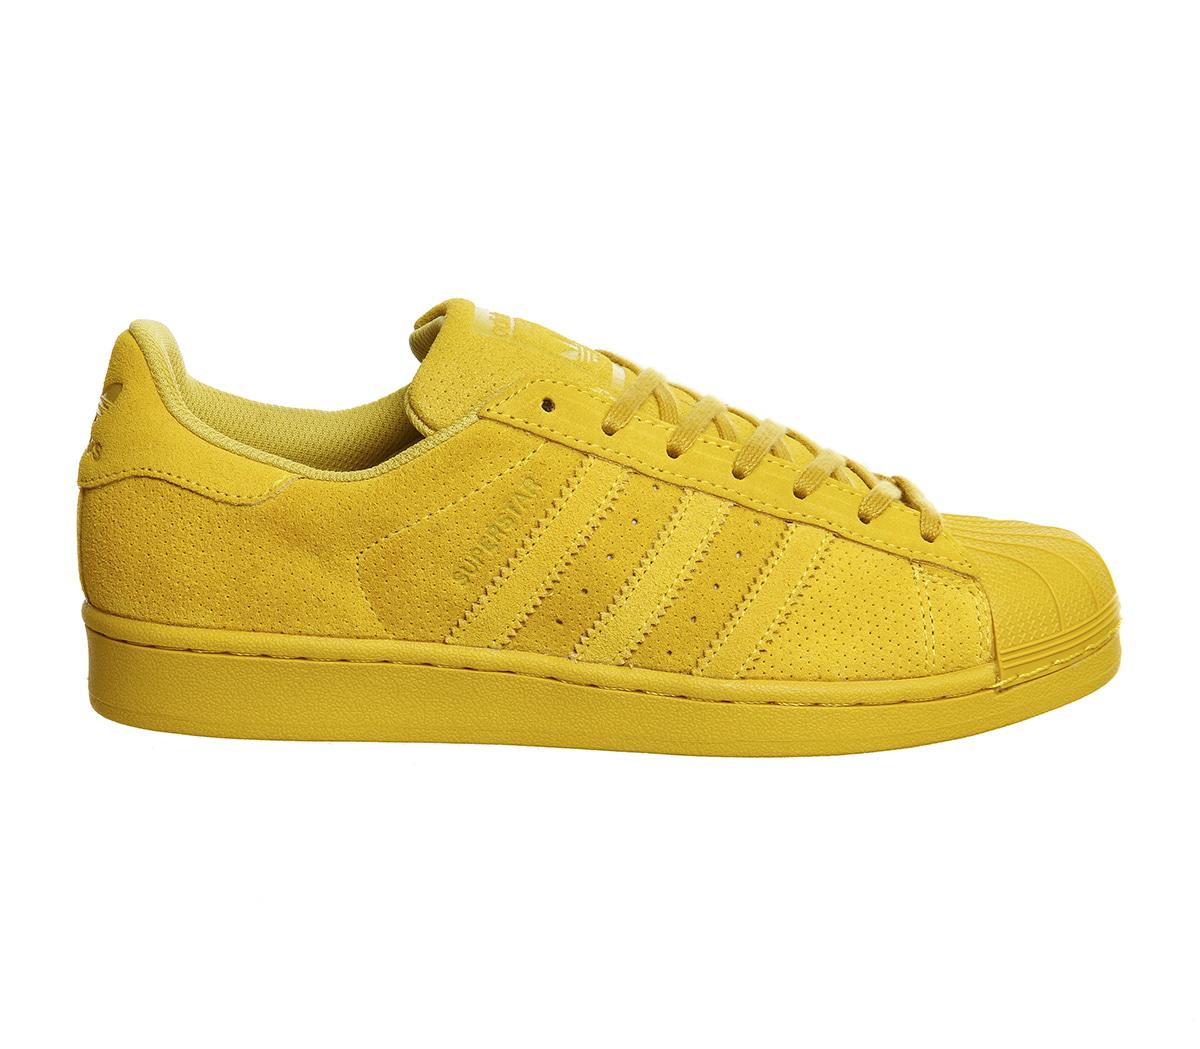 adidas Superstar 1 Suede Low-Top Sneakers in Yellow - Lyst